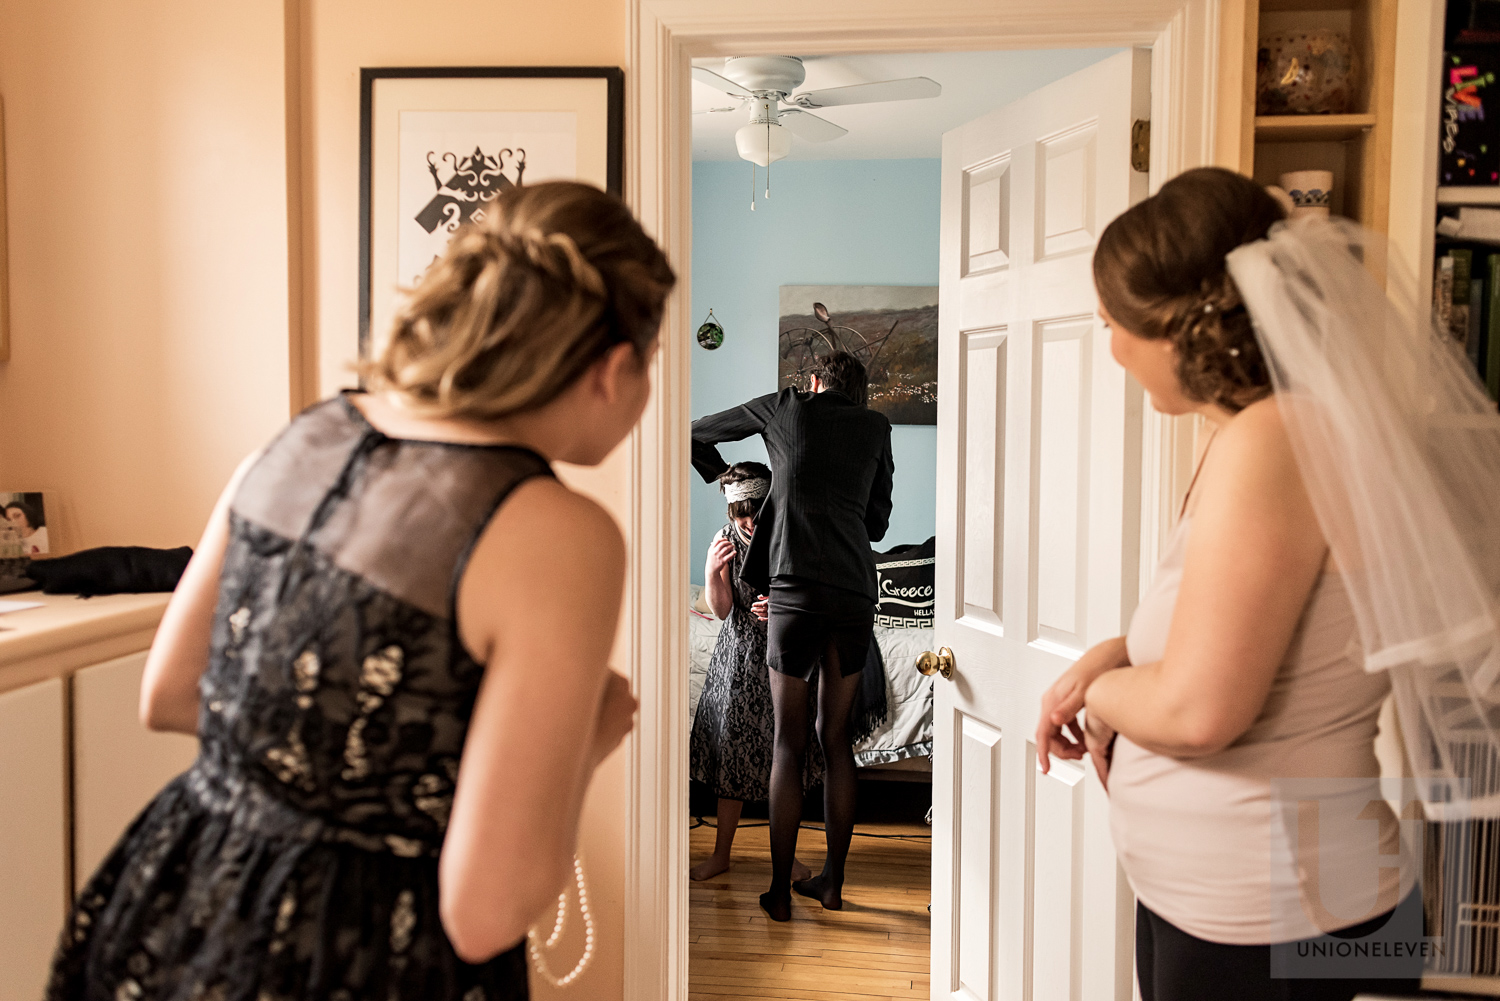 The bride and her Maid of Honour looking over to their bridesmaid getting the final touches of her dress